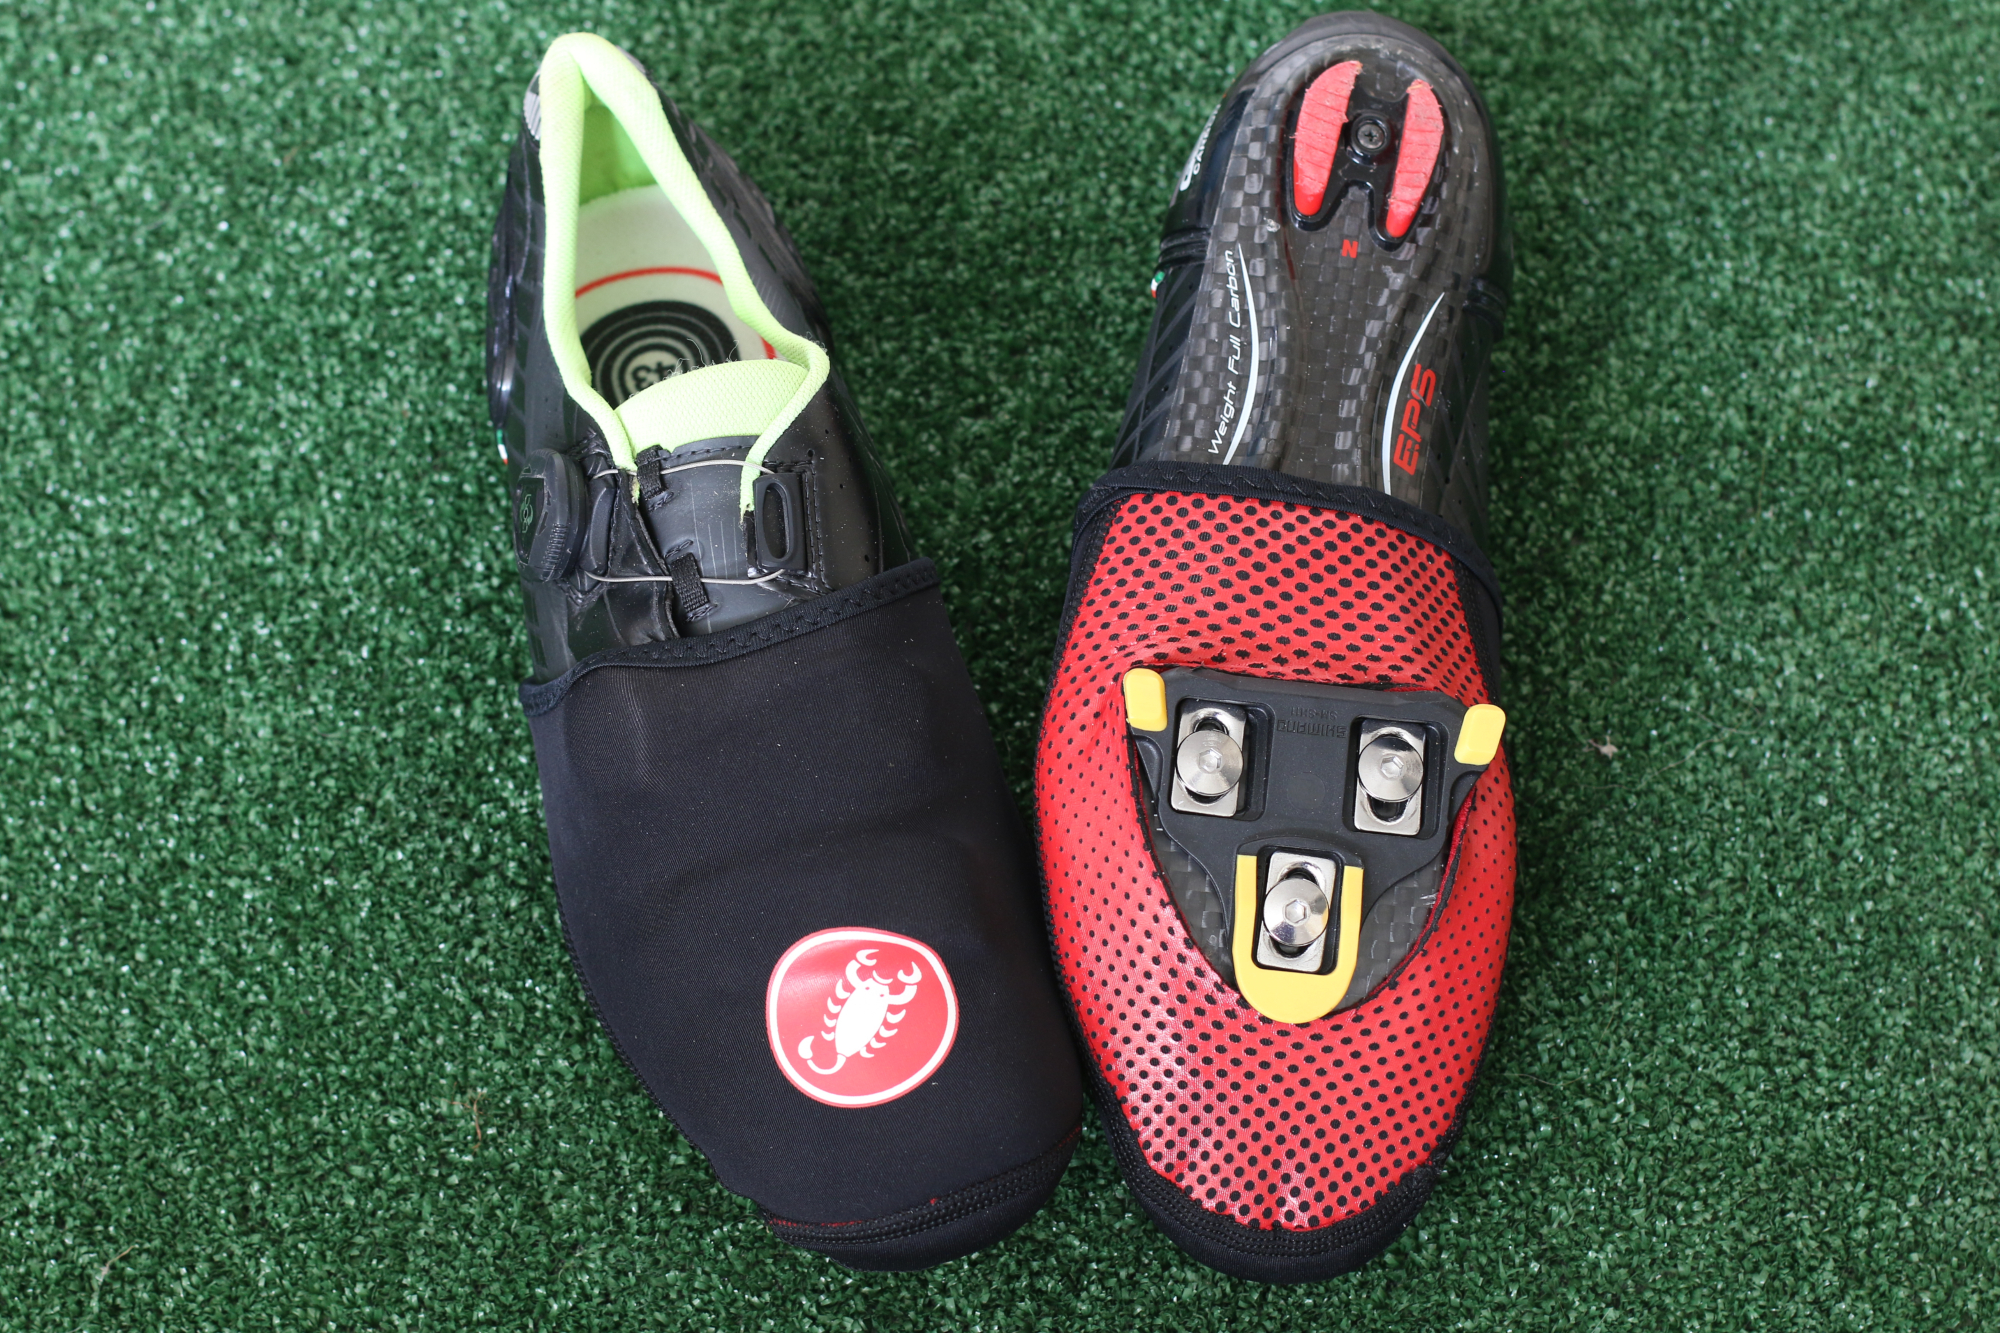 Image shows Castelli's Toe Thingy 2 on cycling shoes.